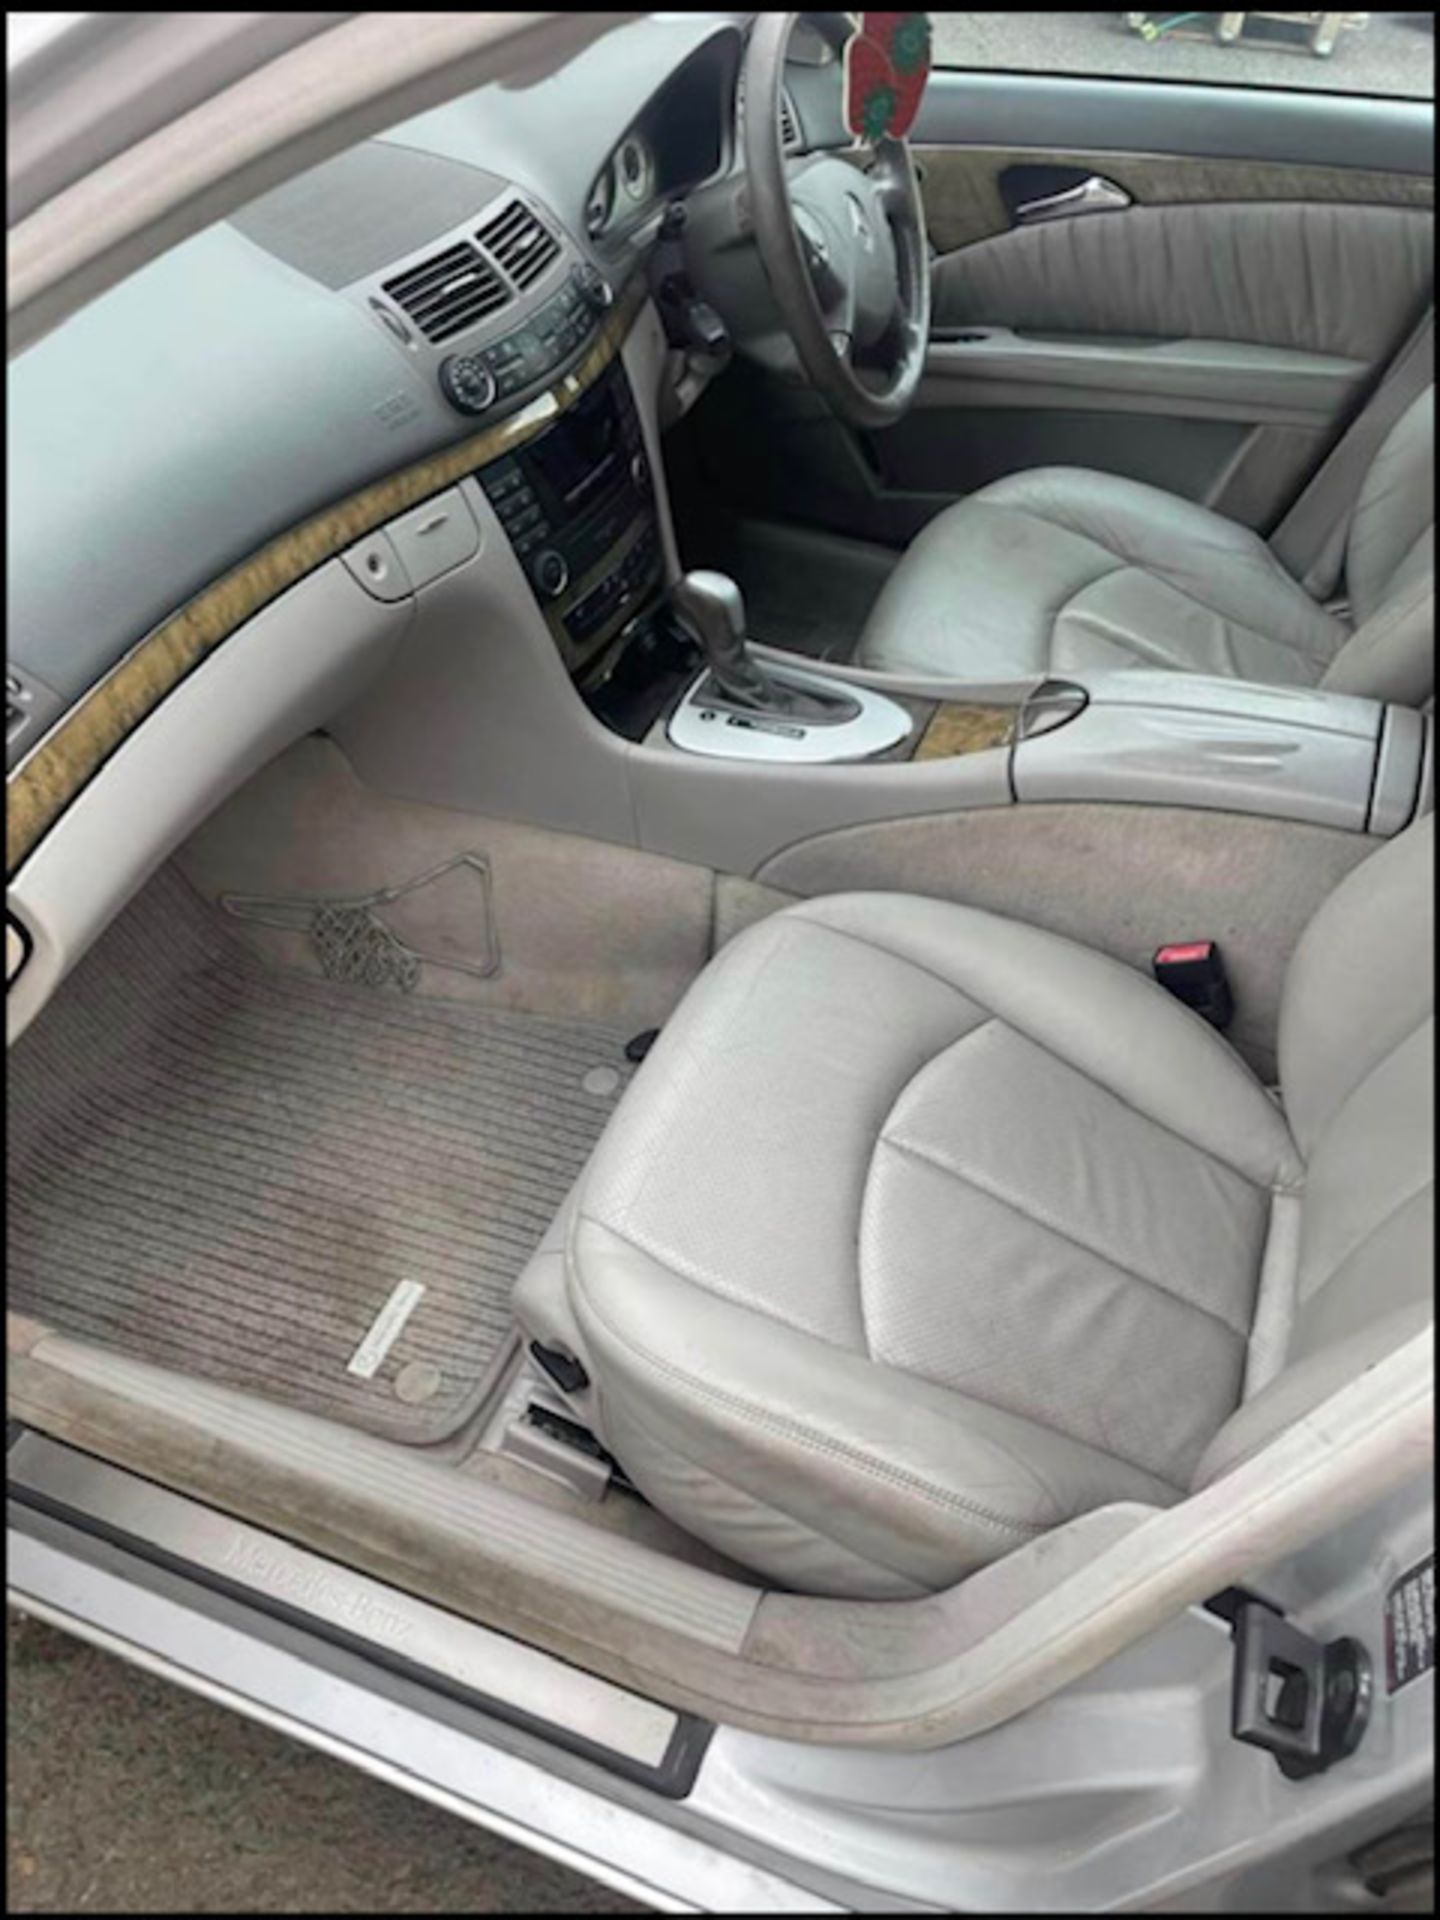 Mercedes E320 CDI 103k genuine miles ,as per pictures has scratches as shown in photos but is all in - Bild 11 aus 14